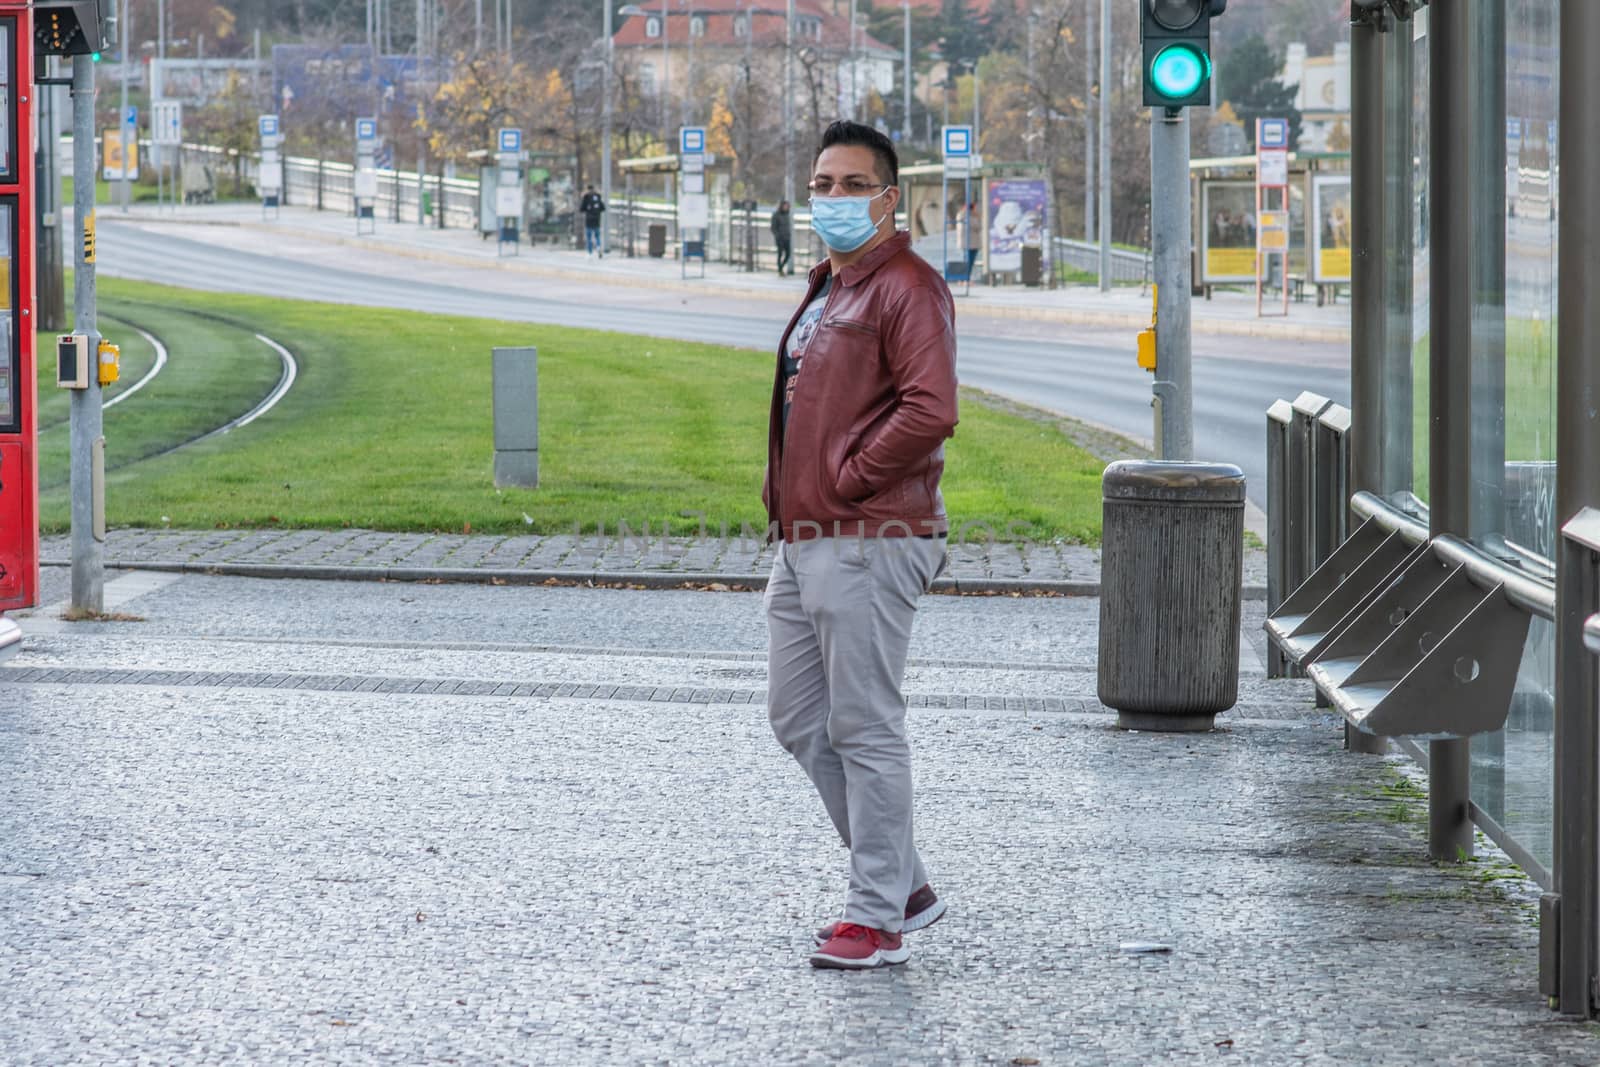 11/16/2020. Prague. Czech Republic. A man wearing a mask is waiting for a tram at Hradcanska tram stop during quarantine. by gonzalobell